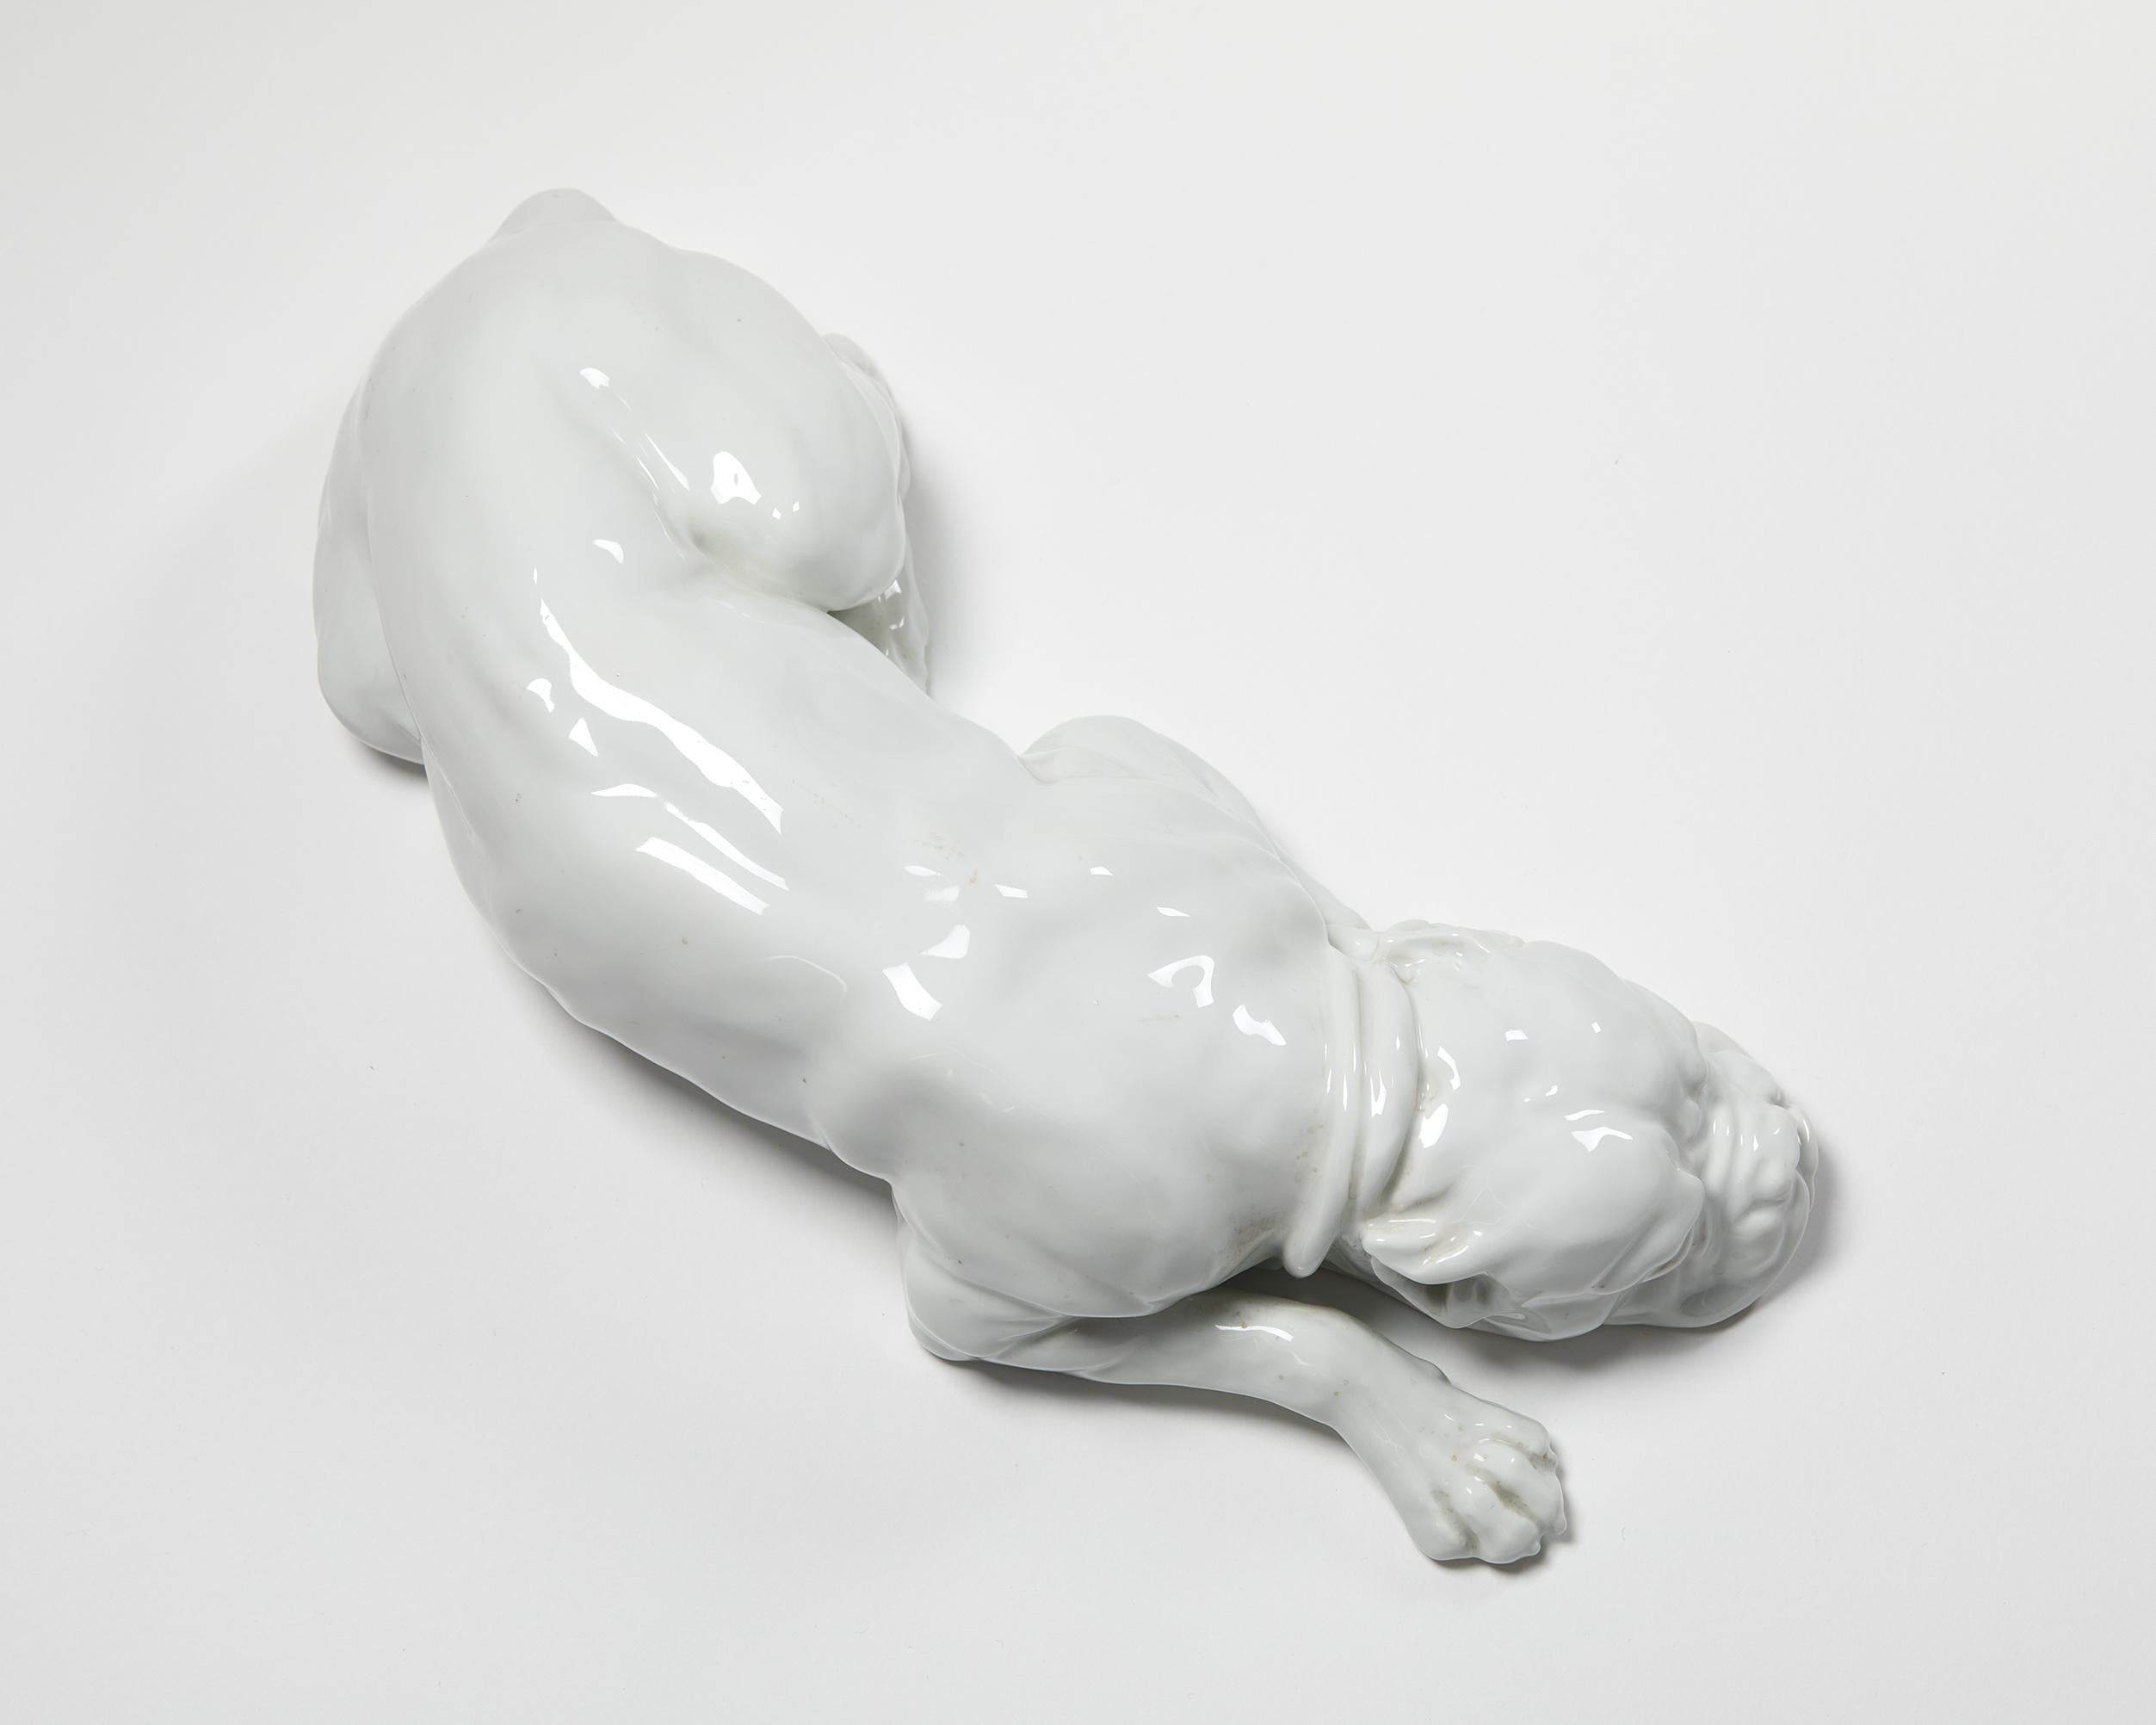 20th Century Sculpture 'Sleeping Boxer' Designed by Thure Öberg for Arabia, Finland, 1910 For Sale